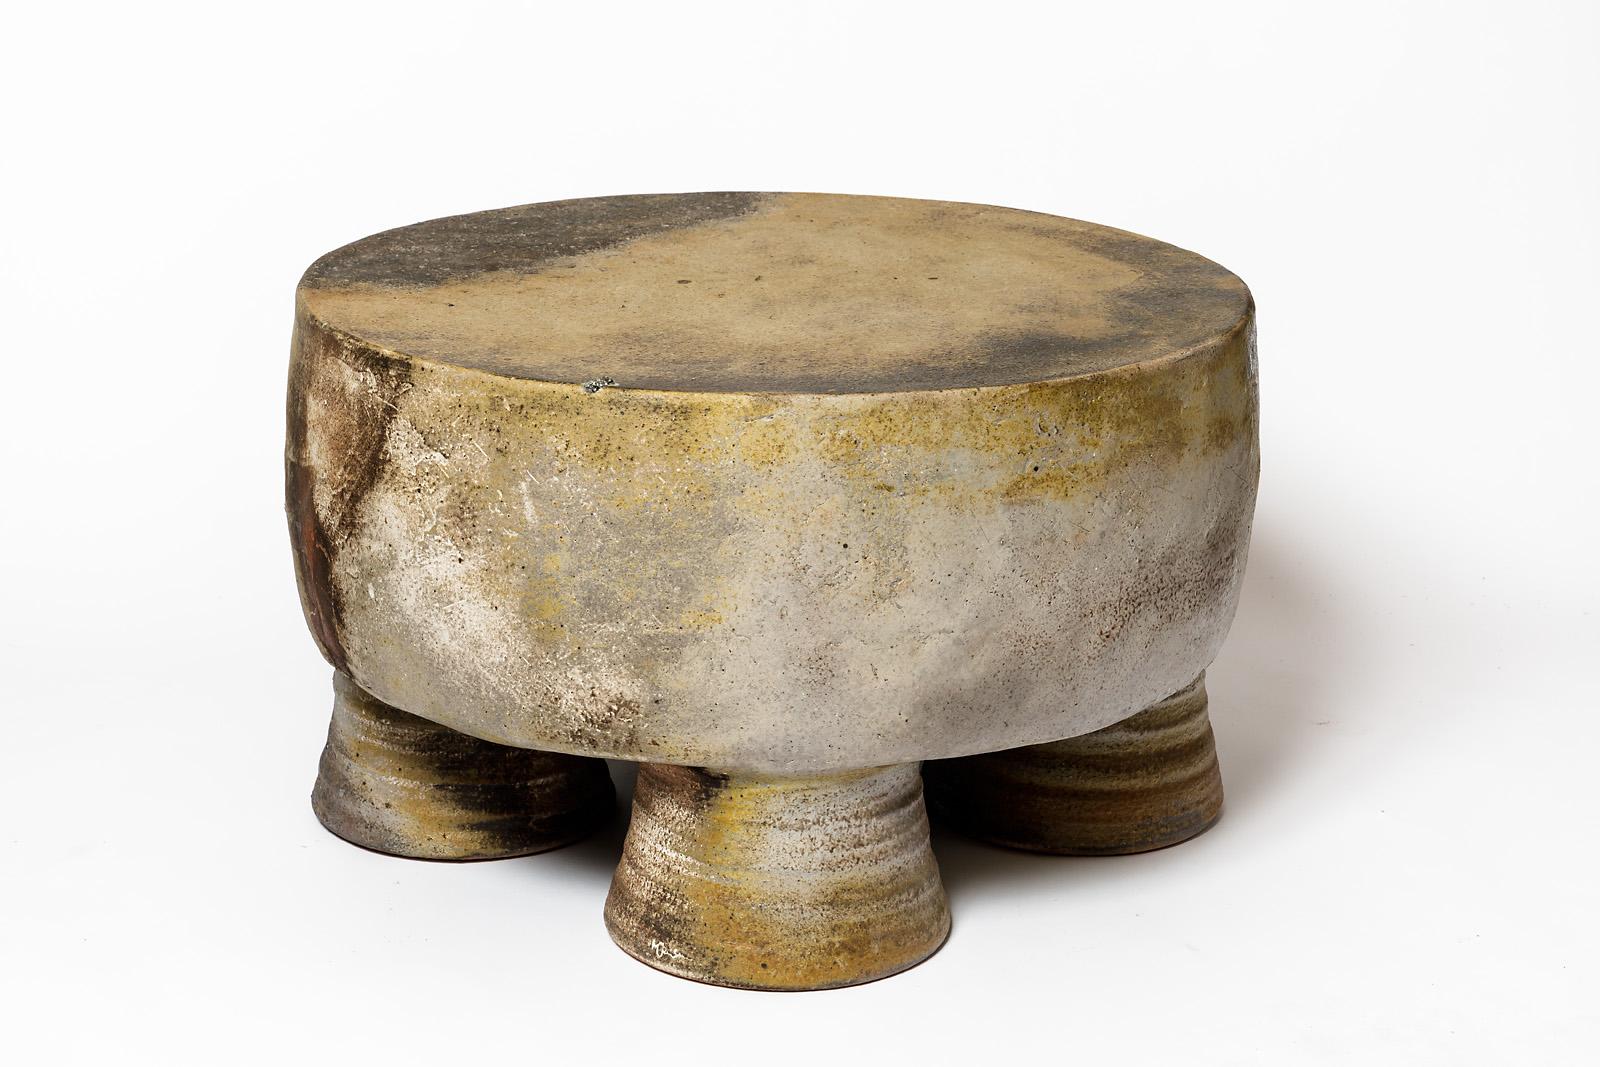 French Wood fired ceramic stool or coffee table by Mia Jensen, 2024. For Sale